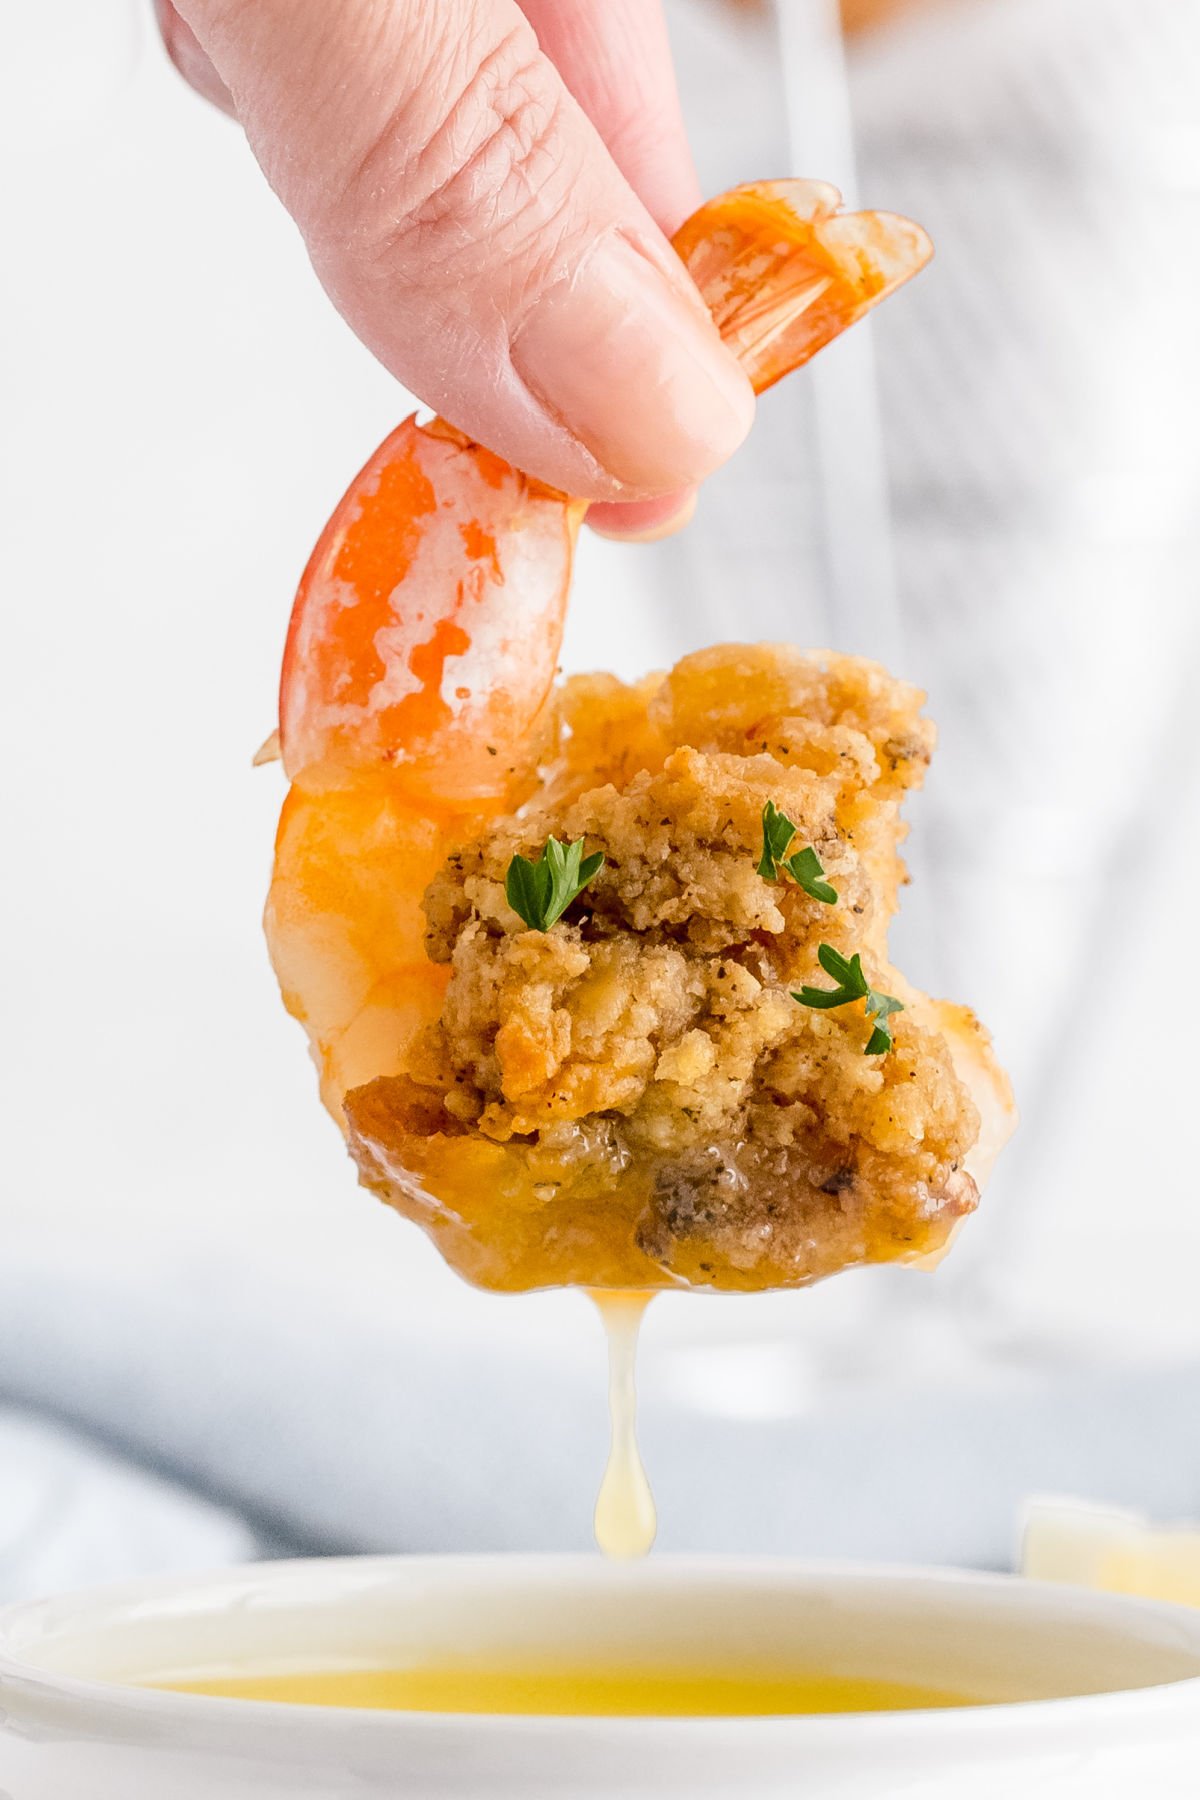 A baked stuffed shrimp being dipped into melted butter.